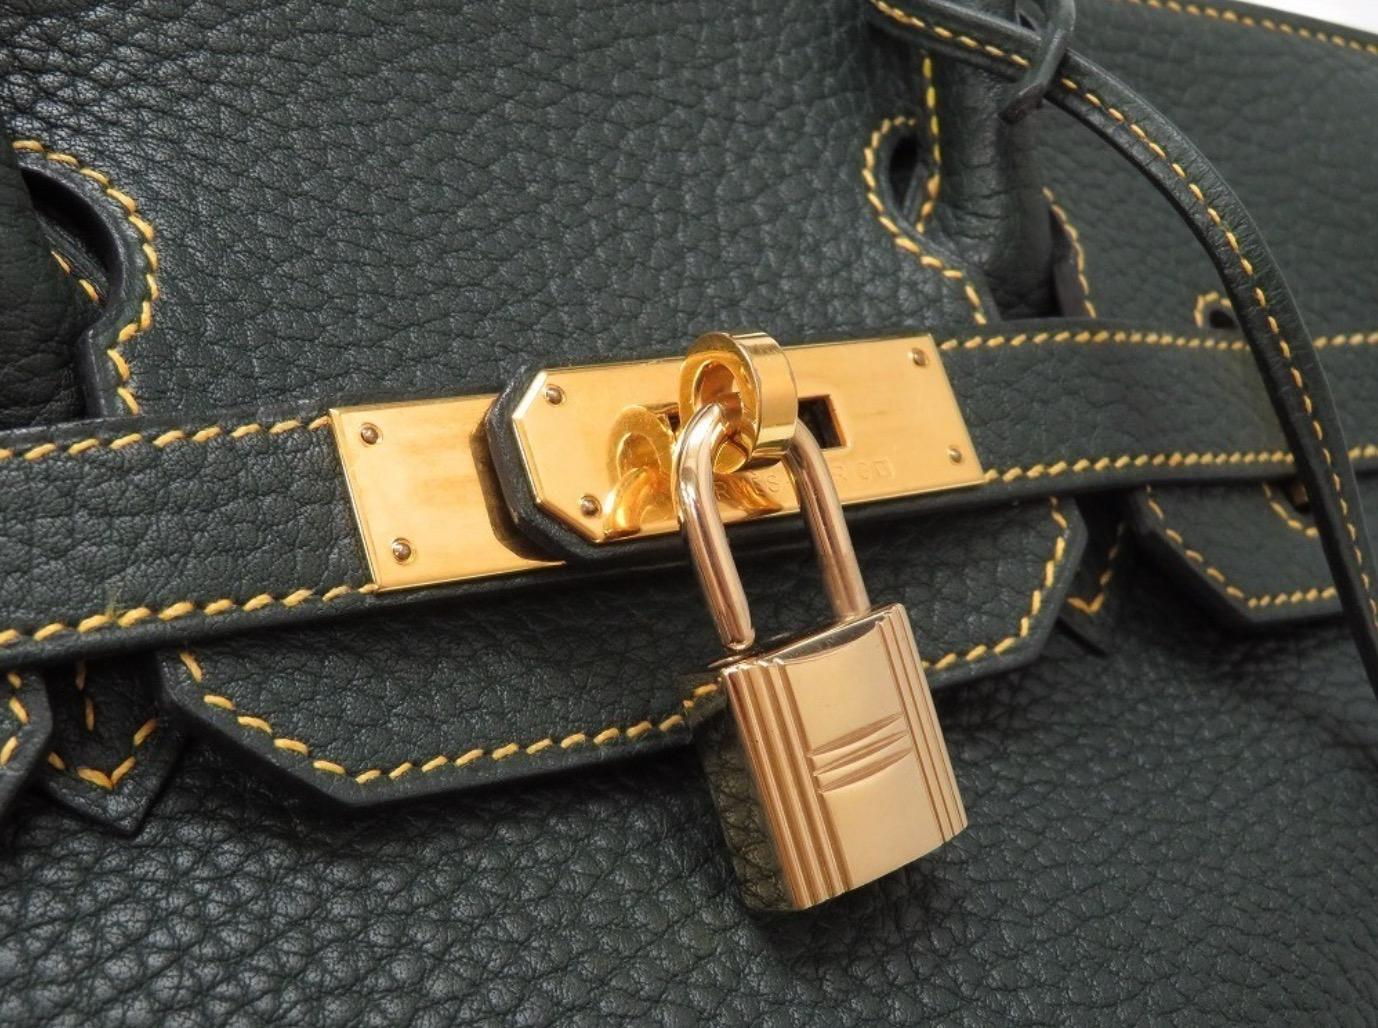 
Leather
Gold tone hardware
Leather lining
Turn lock closure 
Made in France
Date code present
Handle drop 4.5